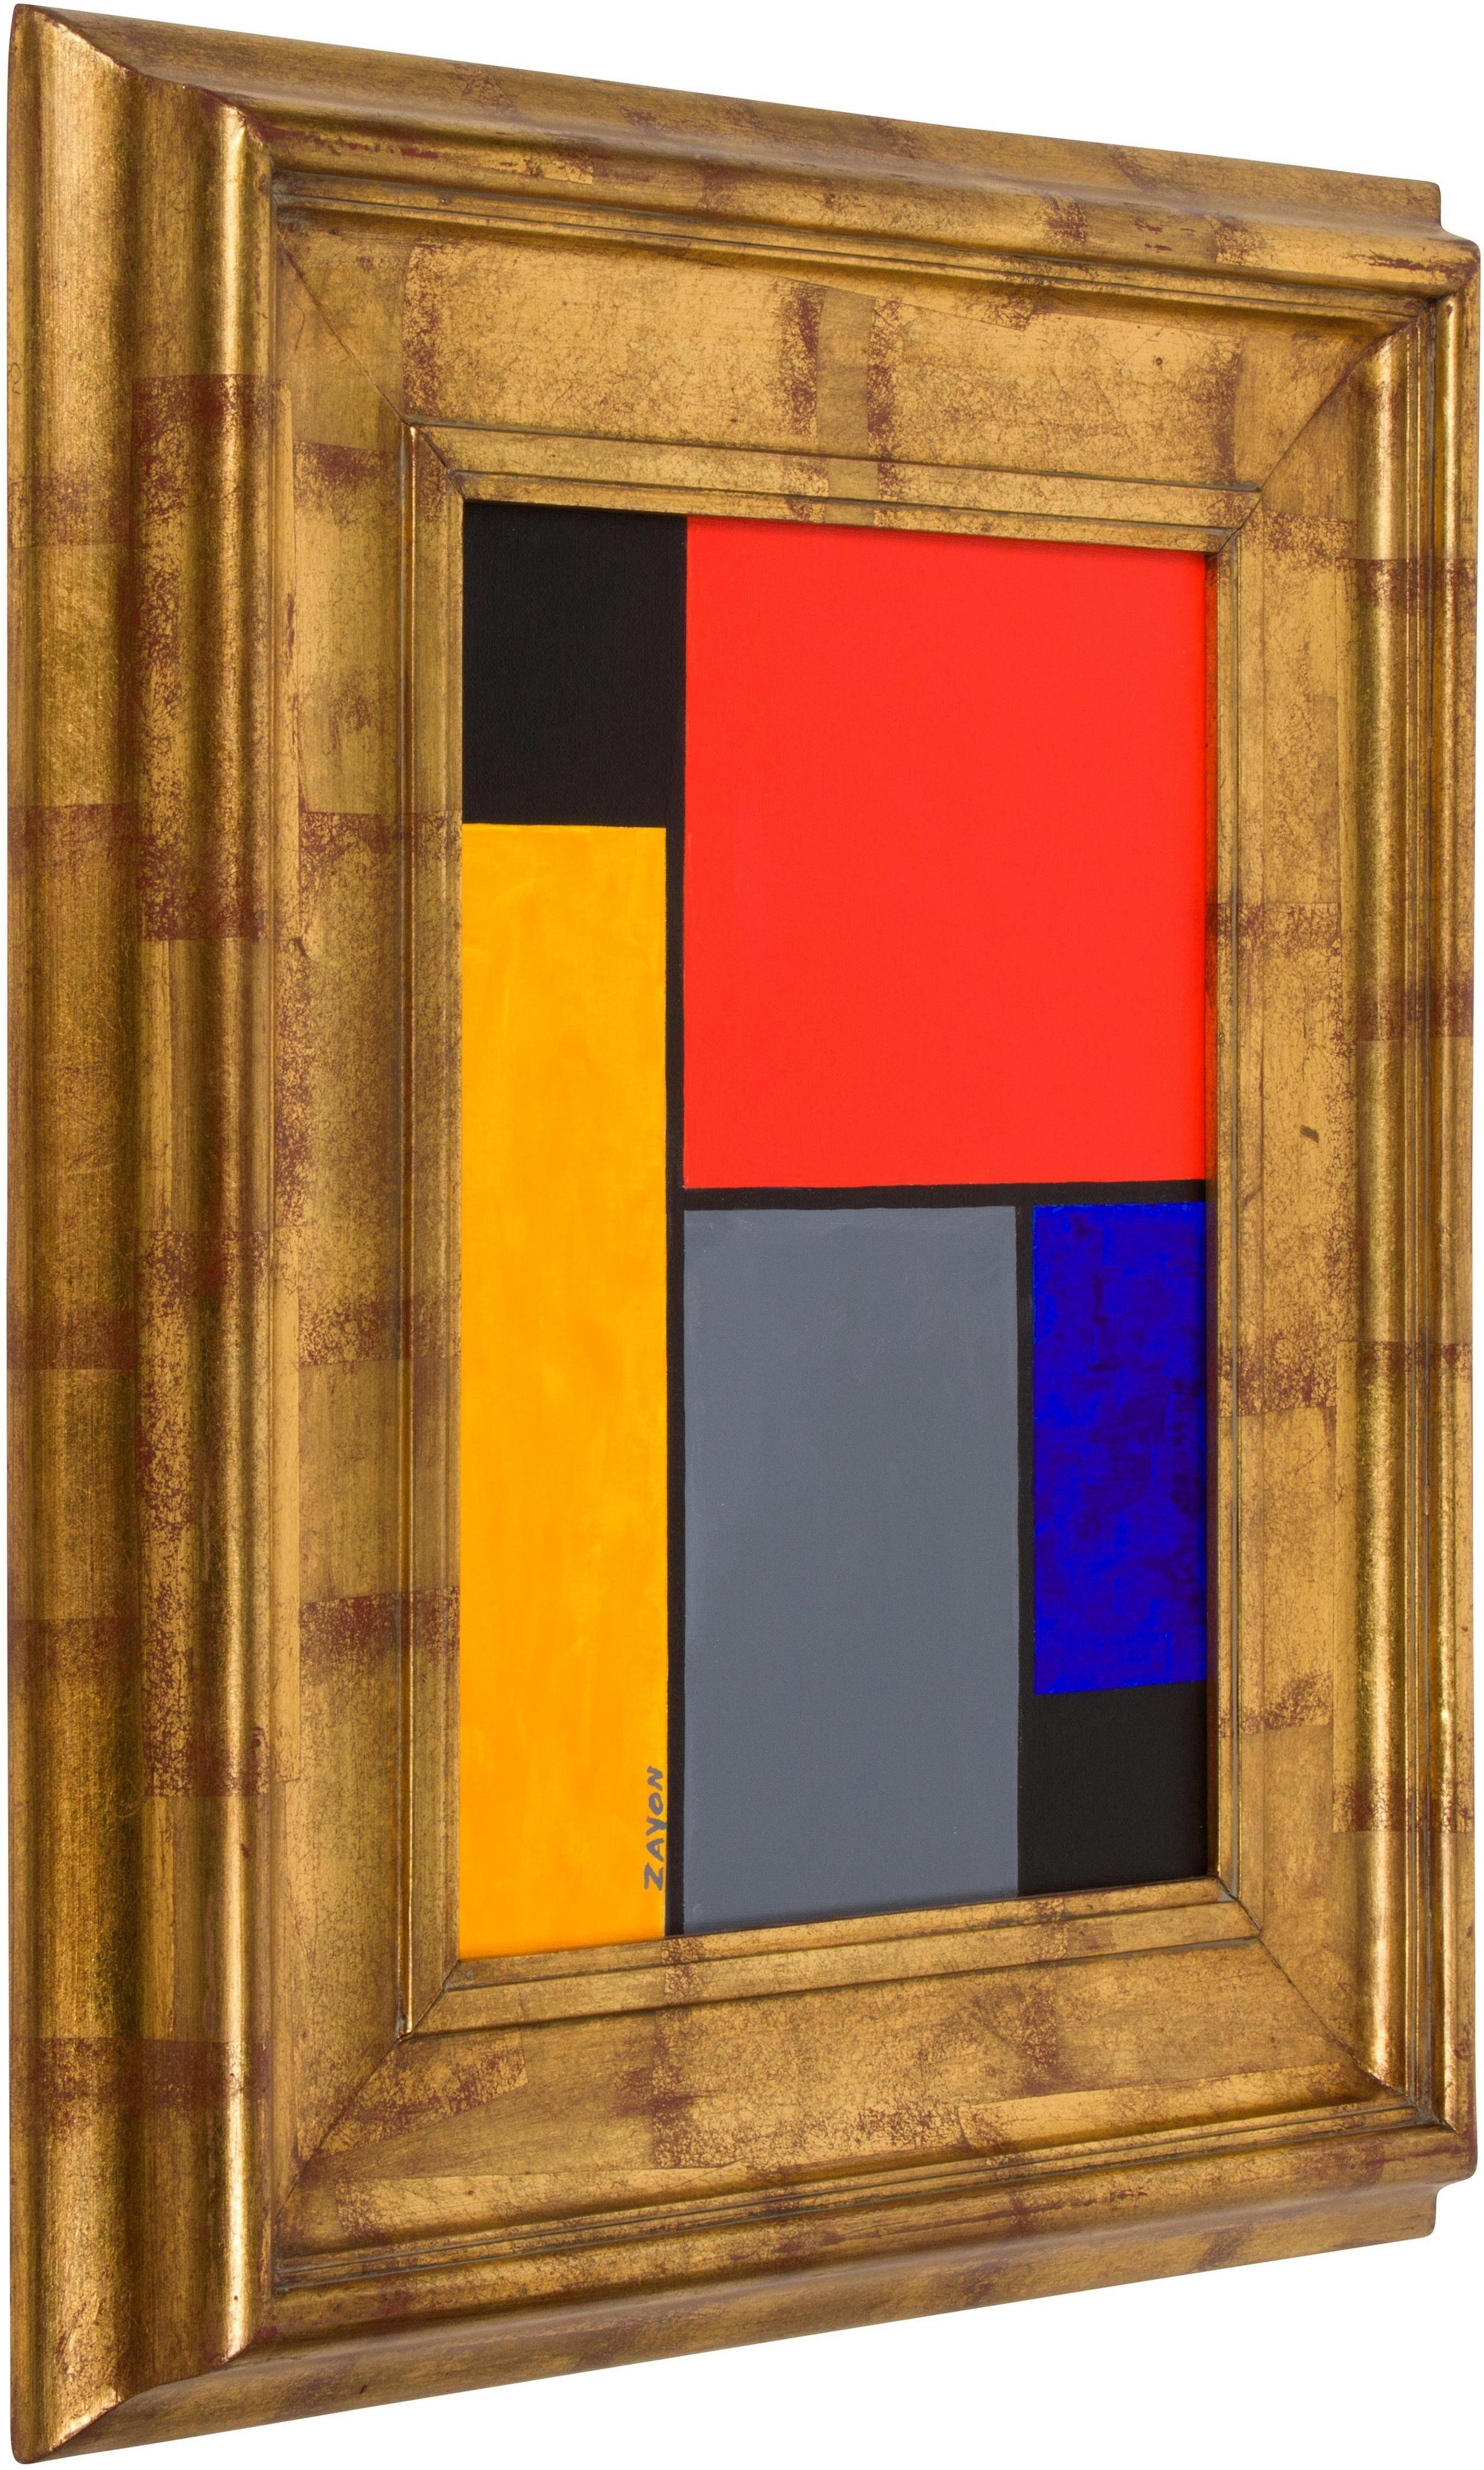 Colorful geometric abstract oil on board well-listed artist Seymour Zayon.

Seymour Zayon, born in 1930, is a contemporary Philadelphia area painter known for his colorful geometric abstract compositions, mixed media and still life paintings. At